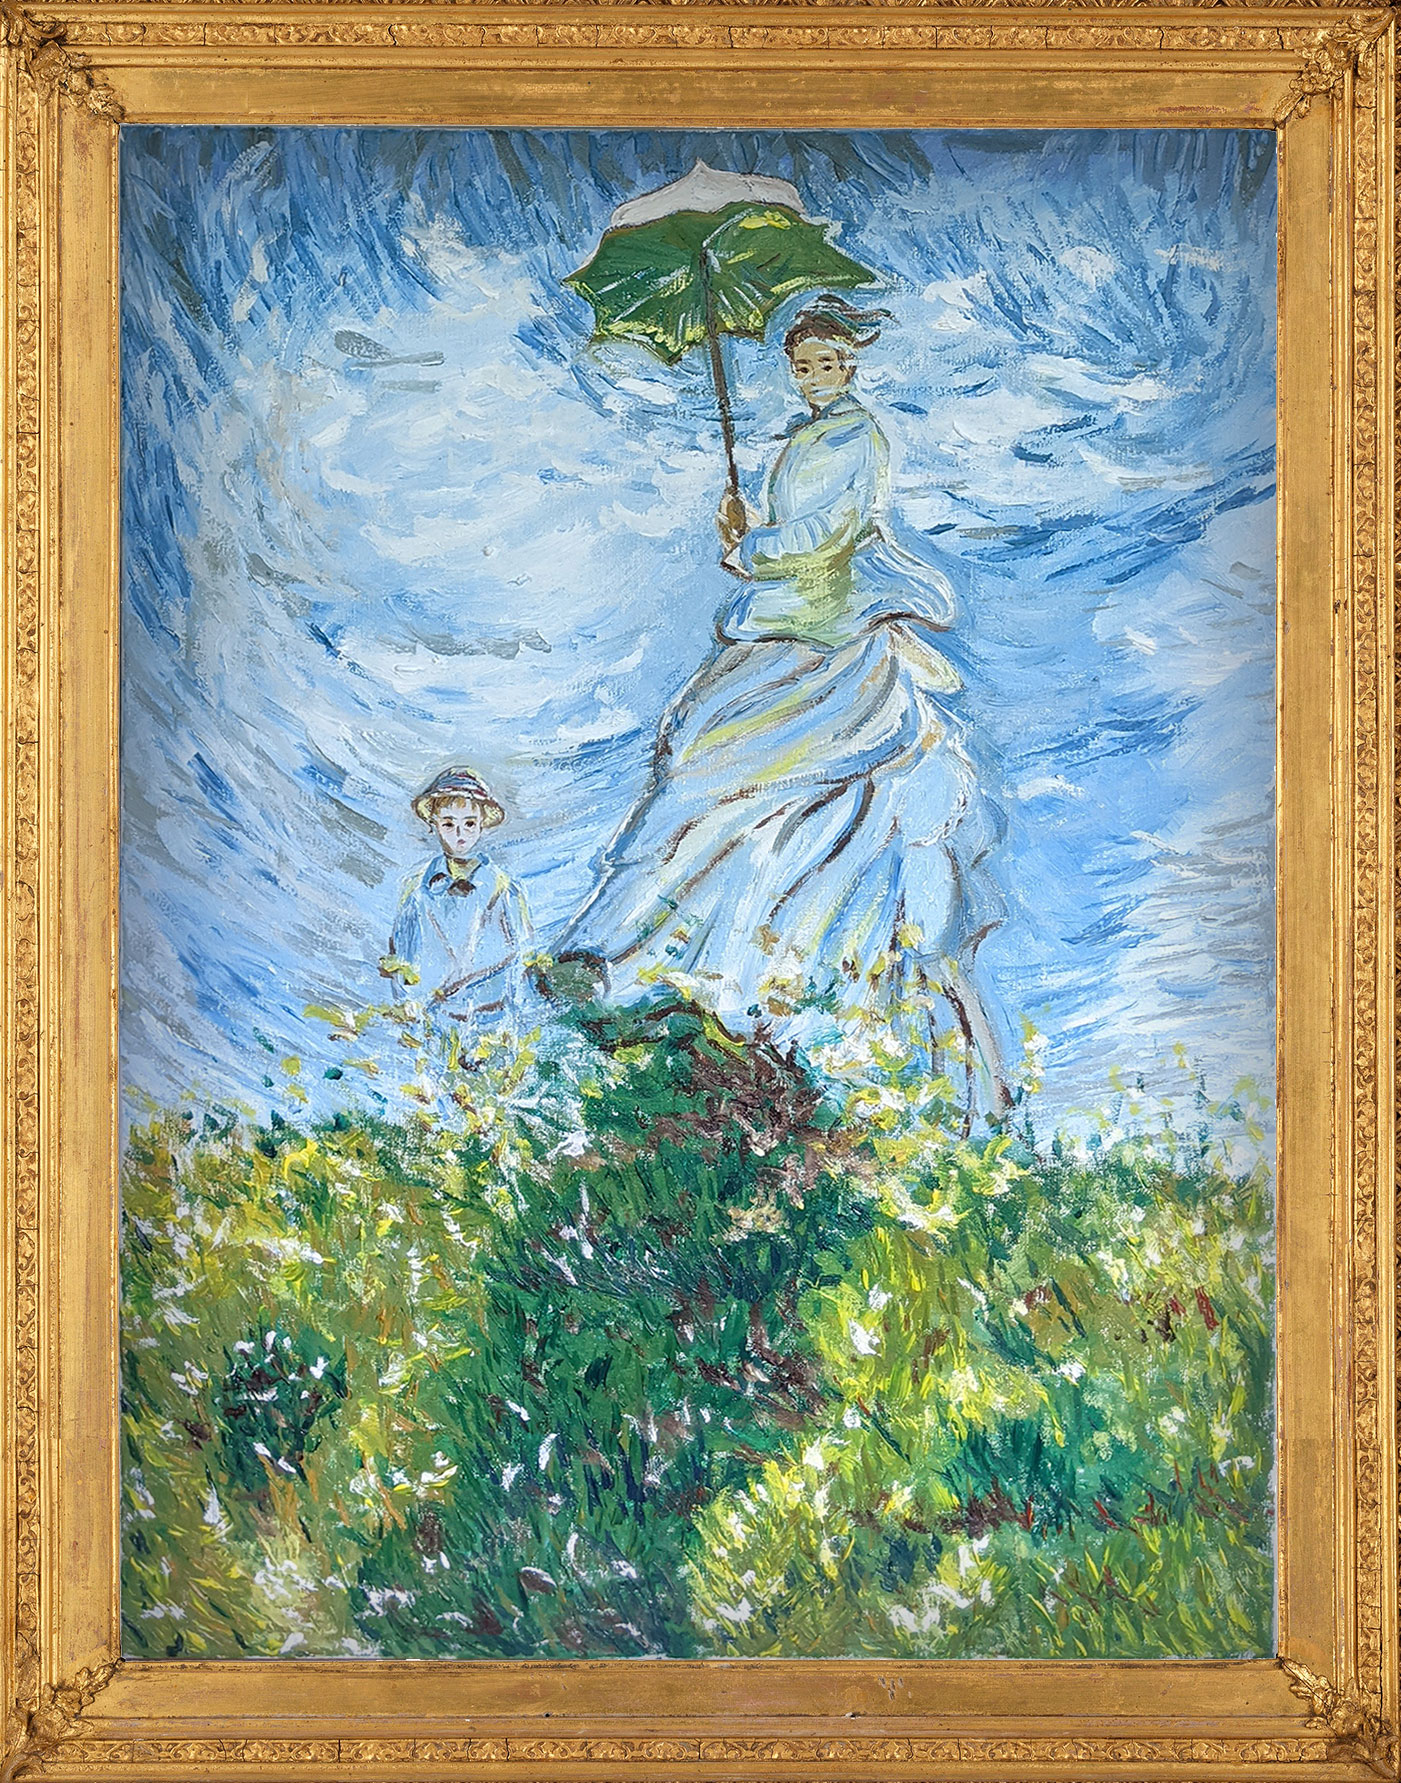 Woman with a Parasol – Madame Monet and Her Son Reproduction by Fan Stanbrough